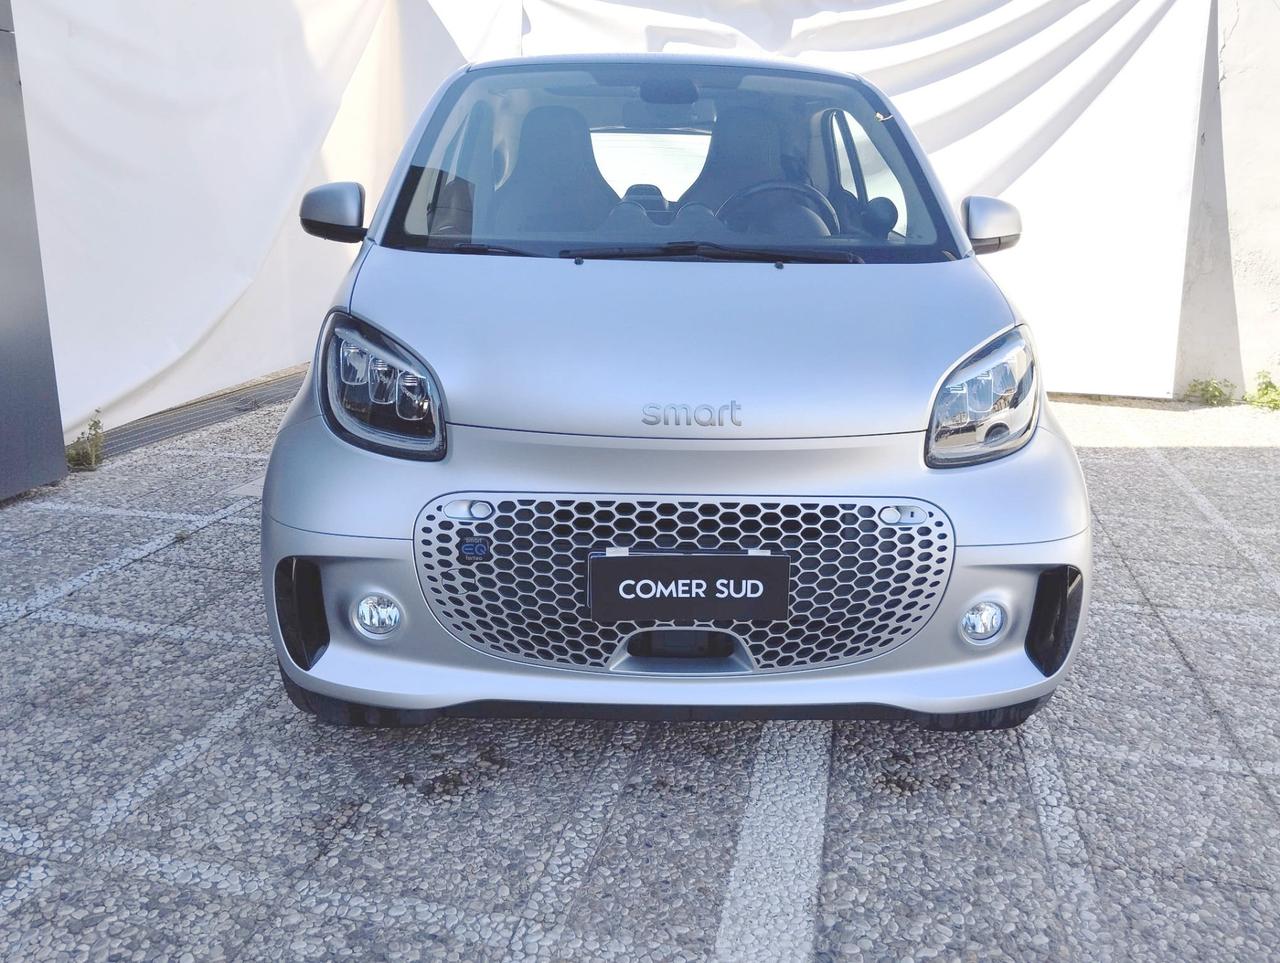 SMART Fortwo III 2020 Fortwo eq mattrunner 22kW